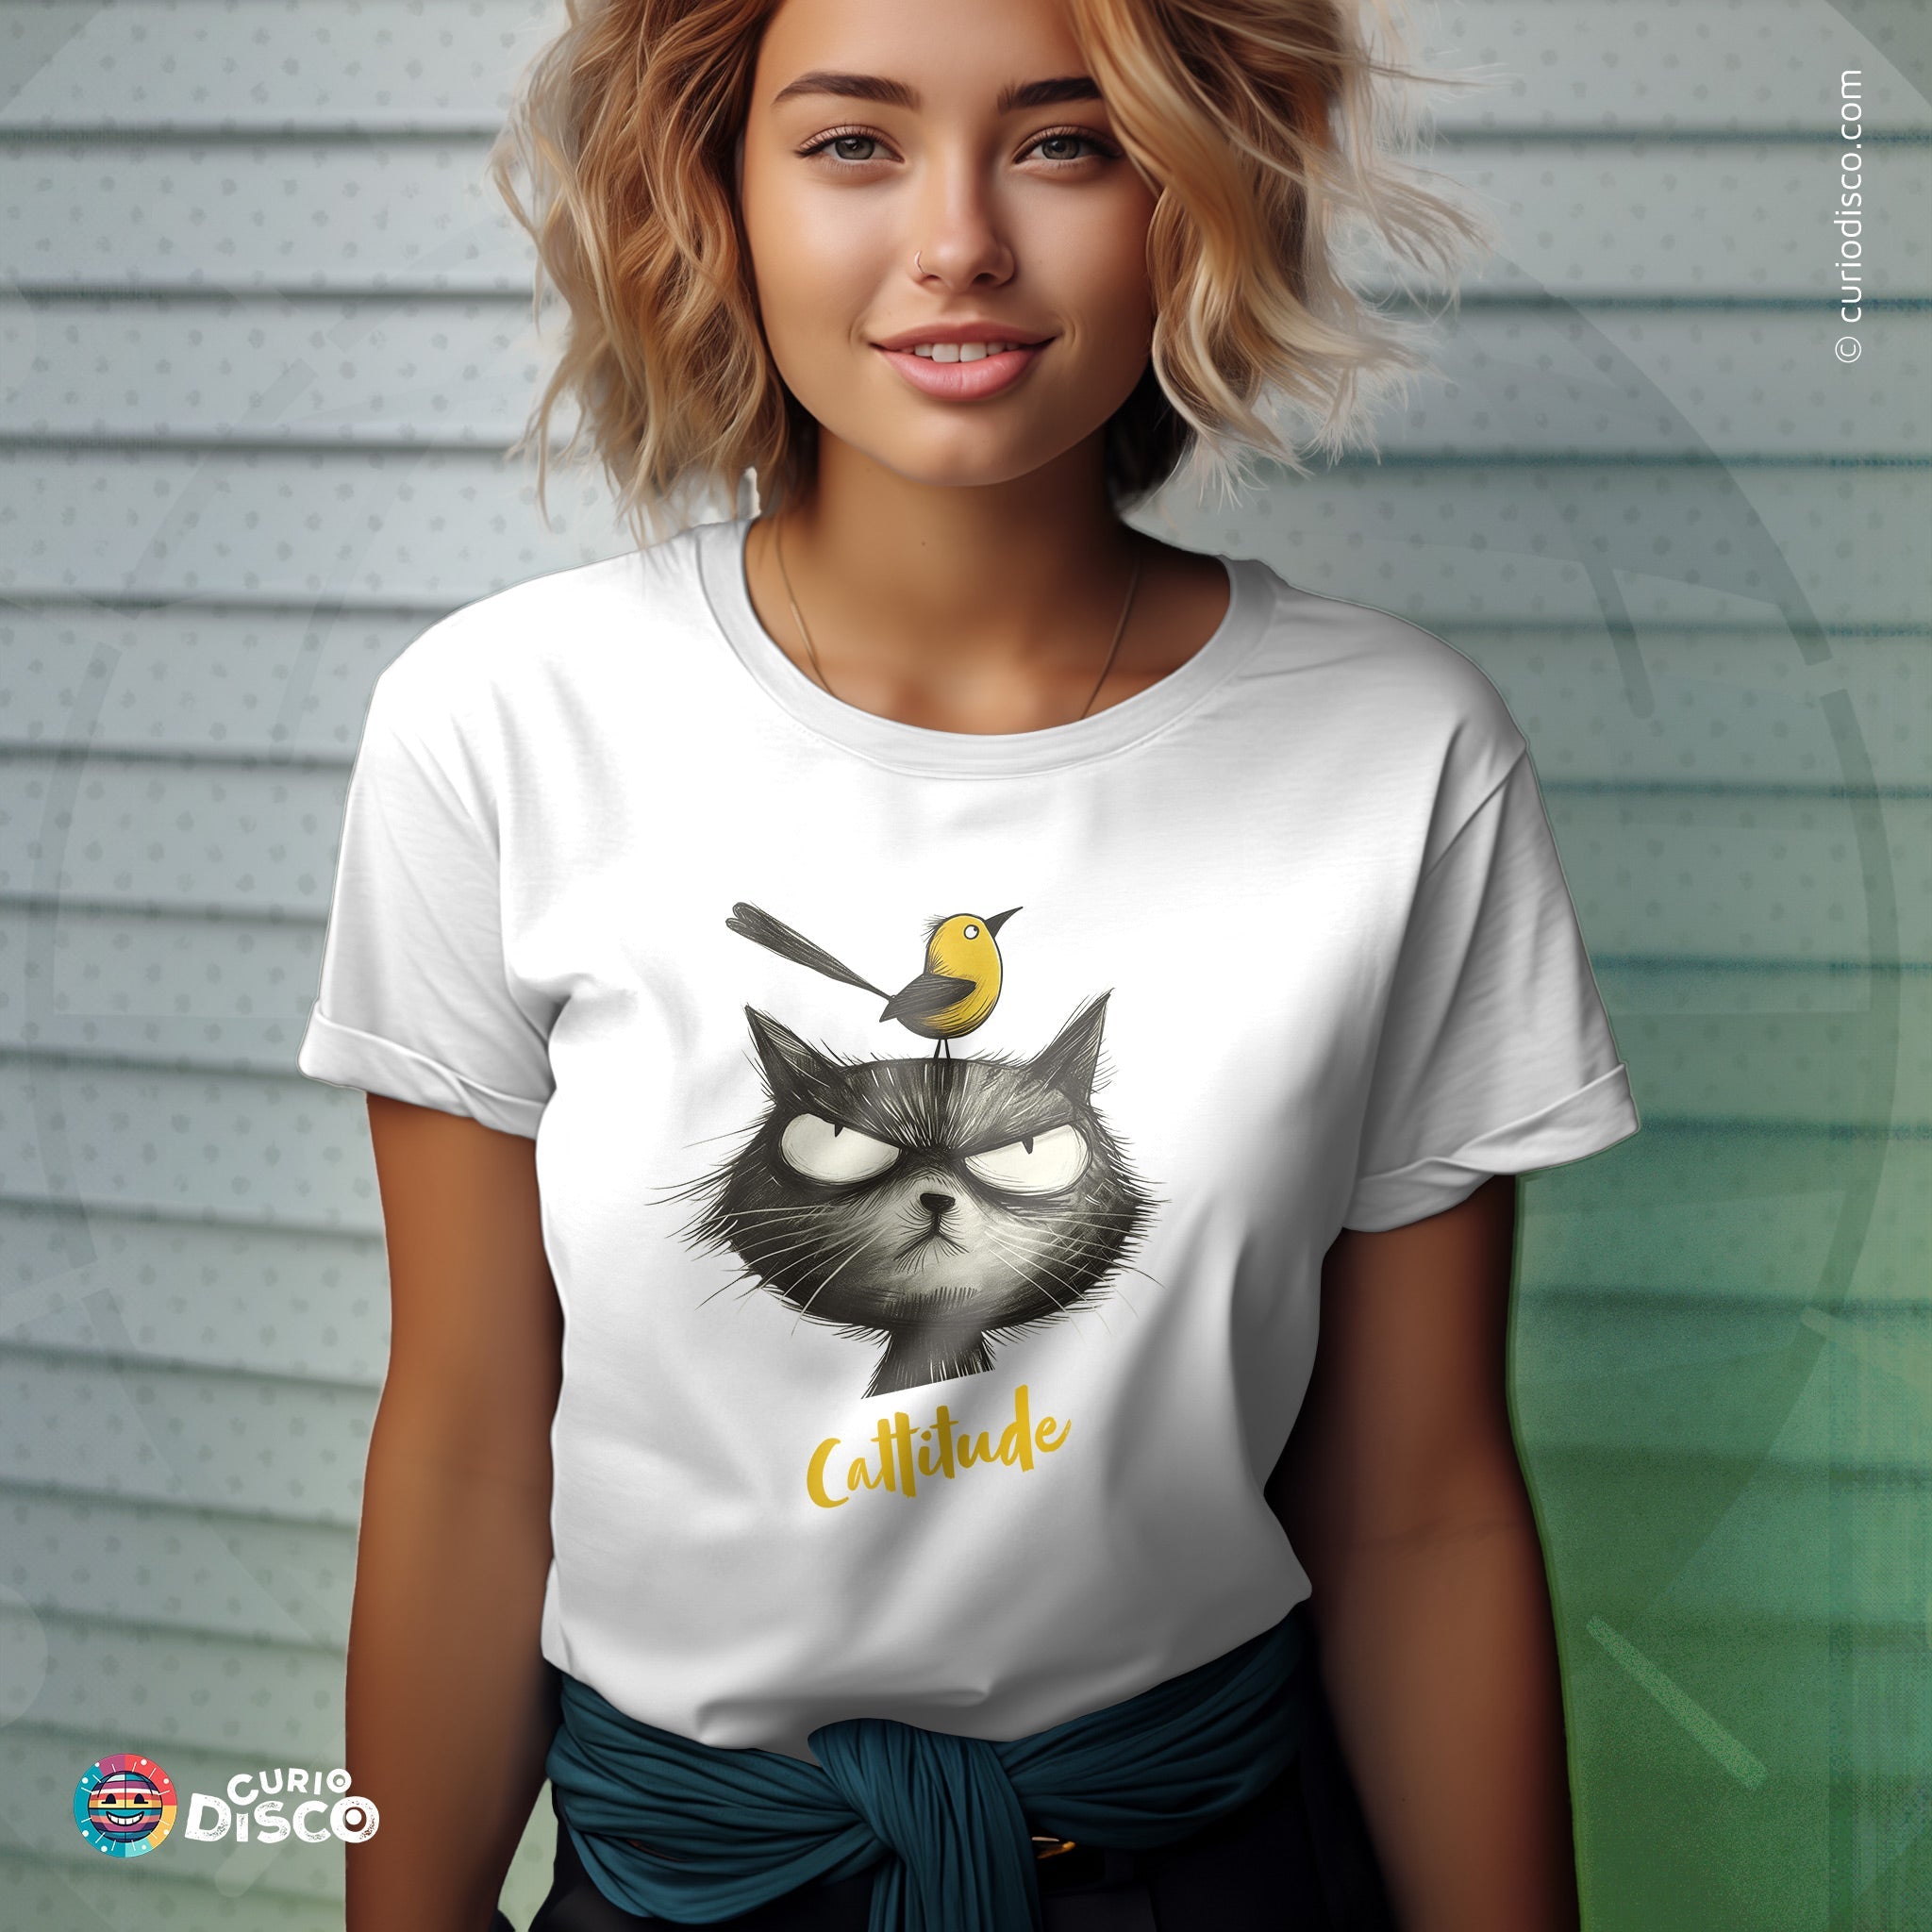 White, short sleeve t-shirt, a funny cat shirt and ironic shirt blend, great as gifts for girlfriend, cat lover gift, and meme shirt. Cat yoga, treat yourself, gifts for cat lovers and cat people. Custom pet shirt in plus size.